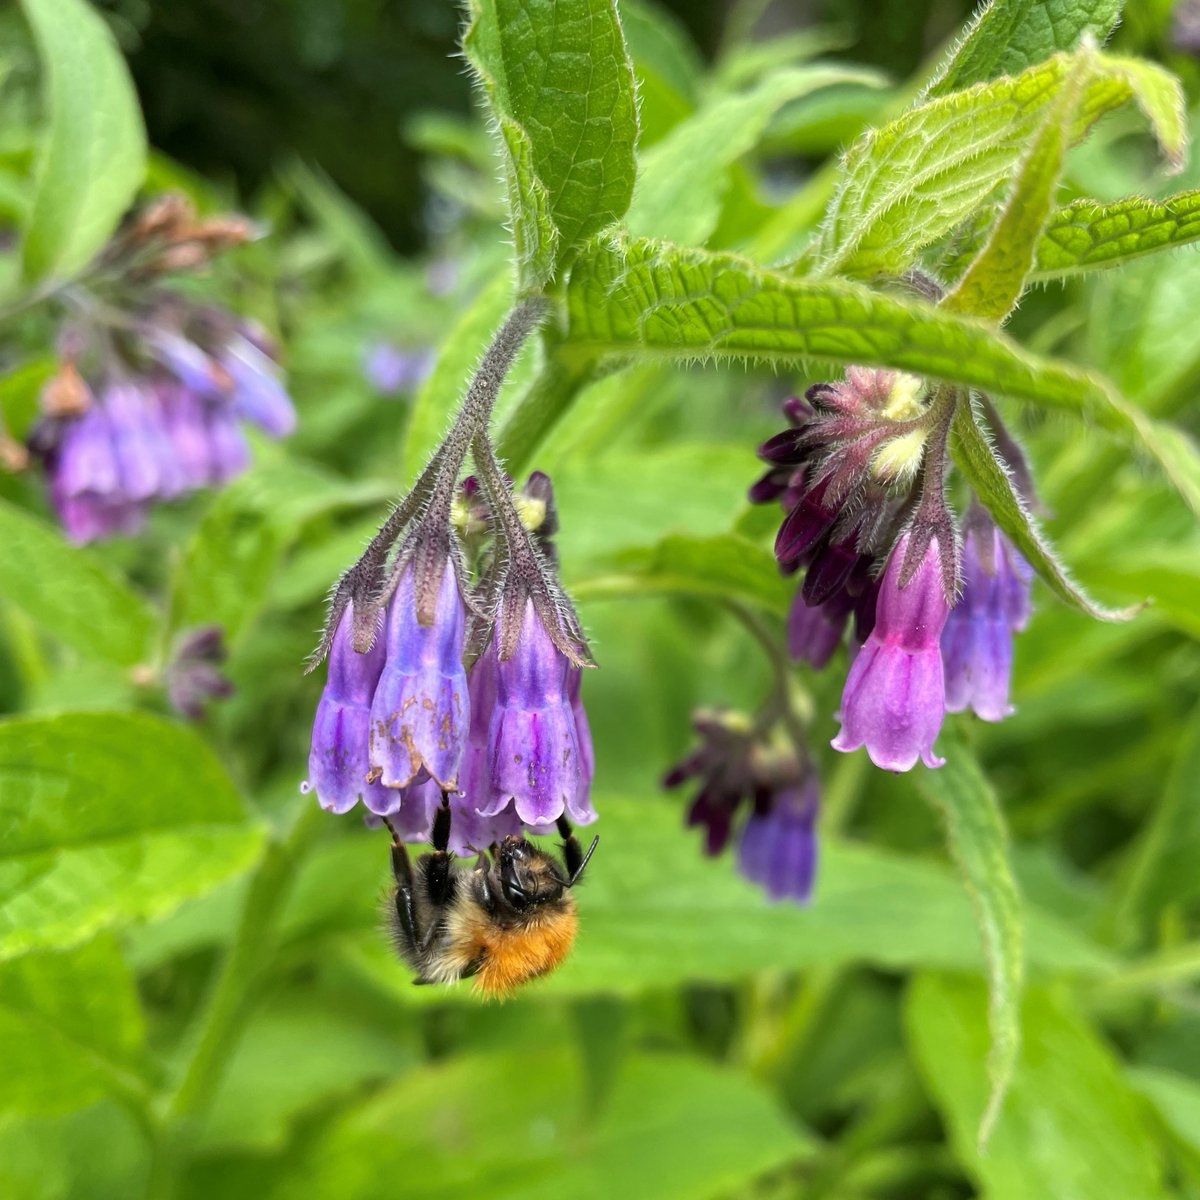 #DYK bumblebees have distinctive features, including being very hairy, having a rounded body shape and flying haphazardly? 🐝 Don't forget you have until Friday to submit your photos of bumblebees on flowers to help our research with the @BumblebeeTrust: rhs.org.uk/science/help-o…